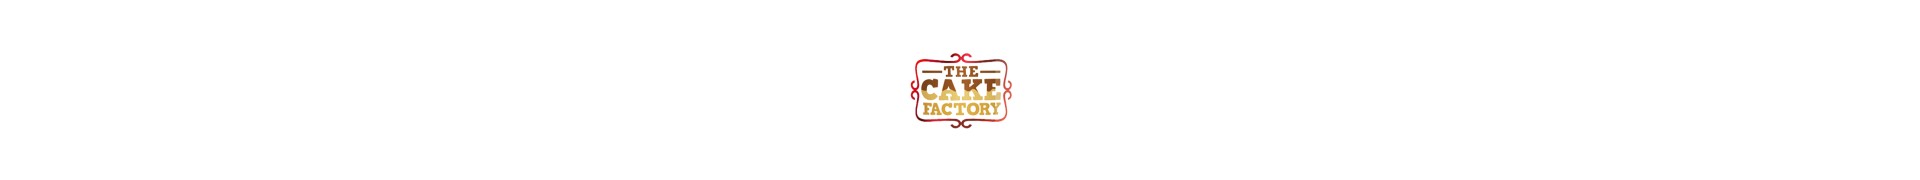 THE CAKE FACTORY